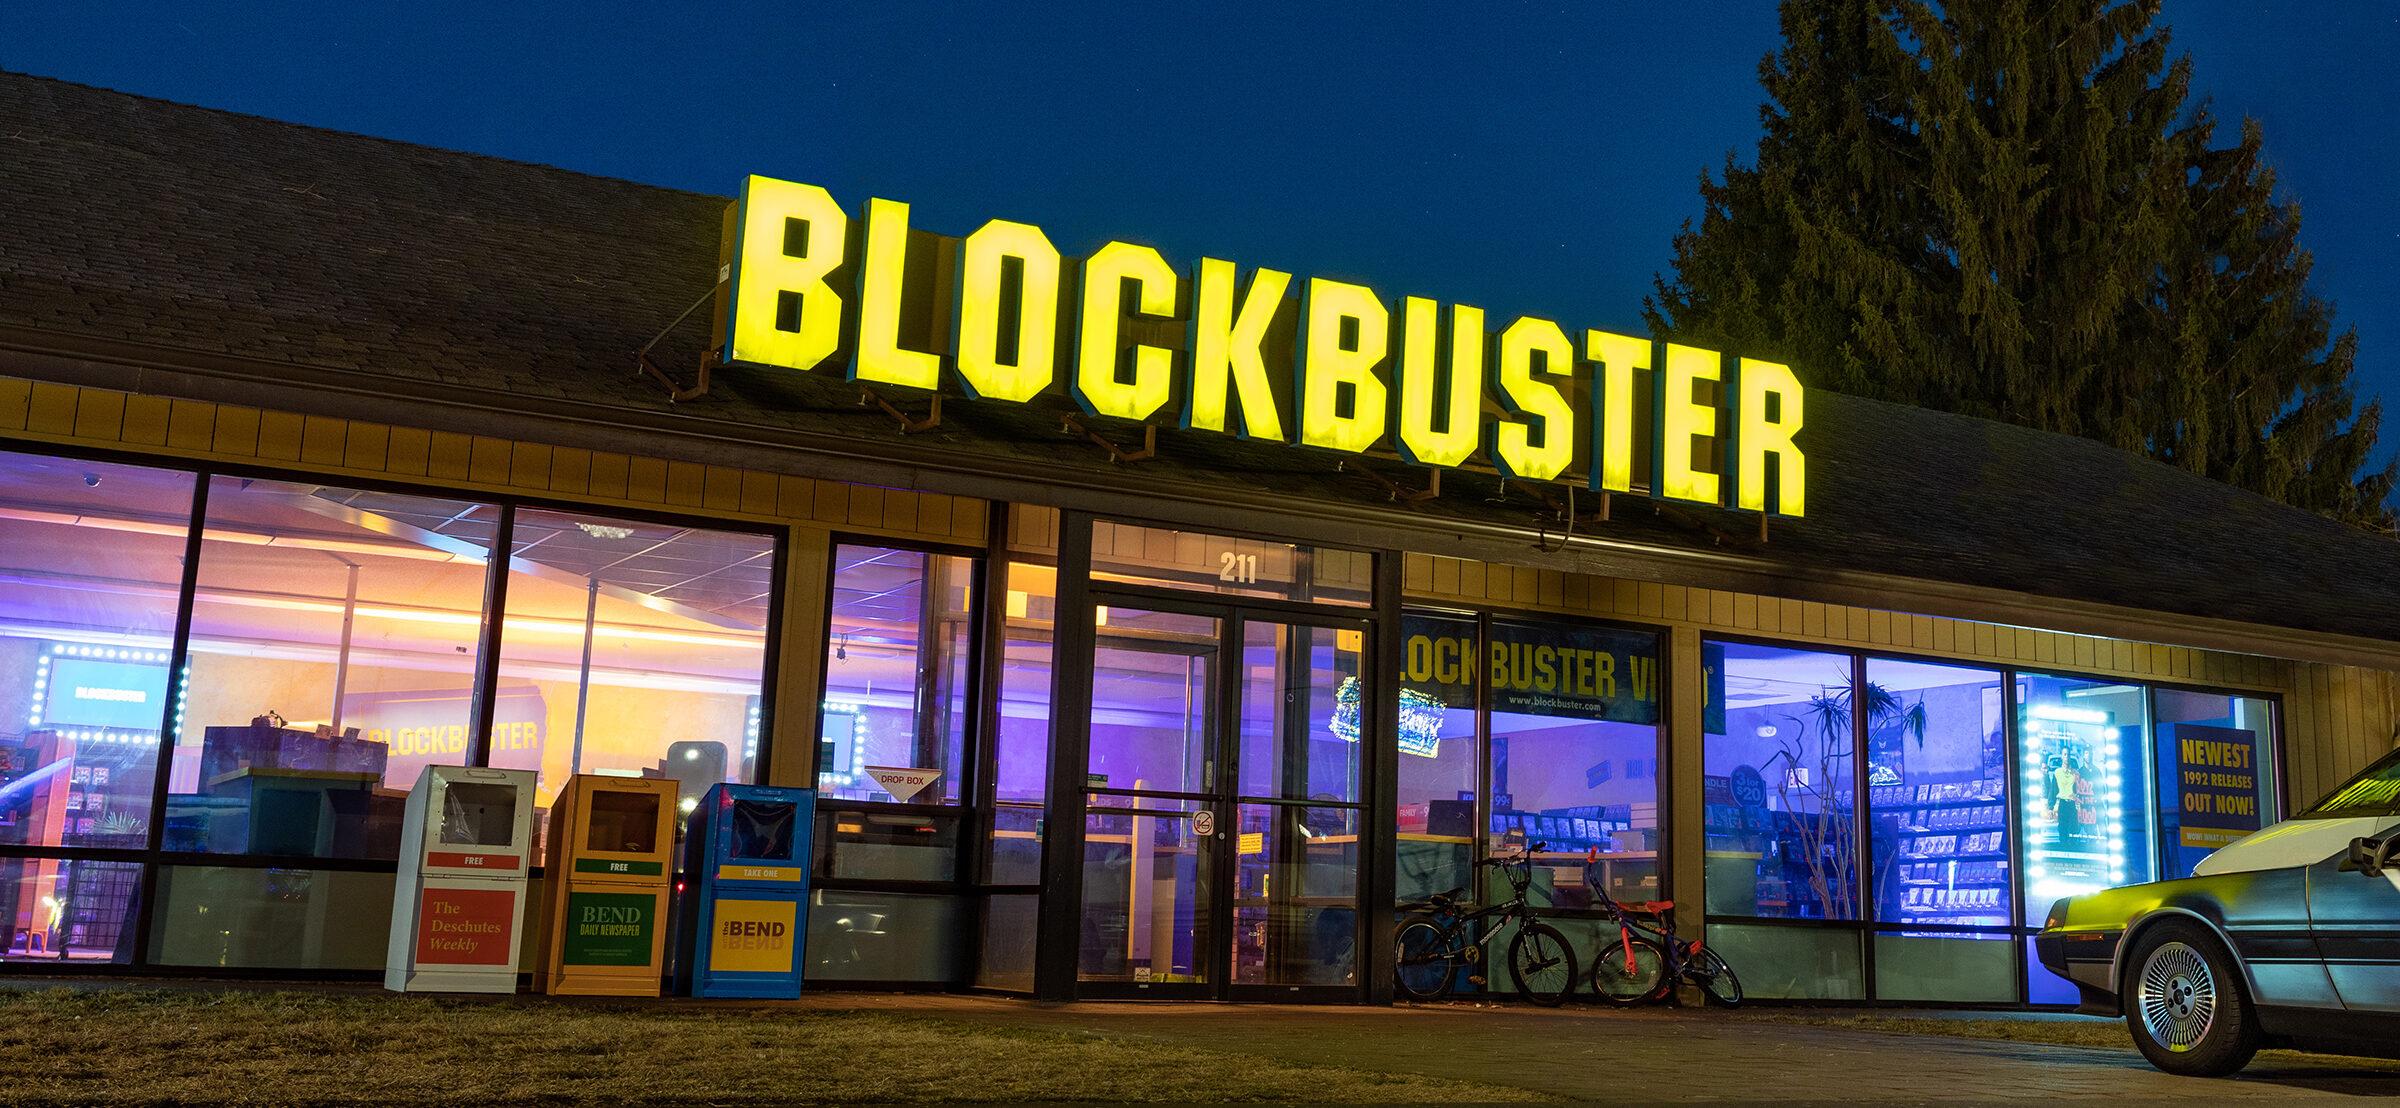 Last Blockbuster store turned into Airbnb